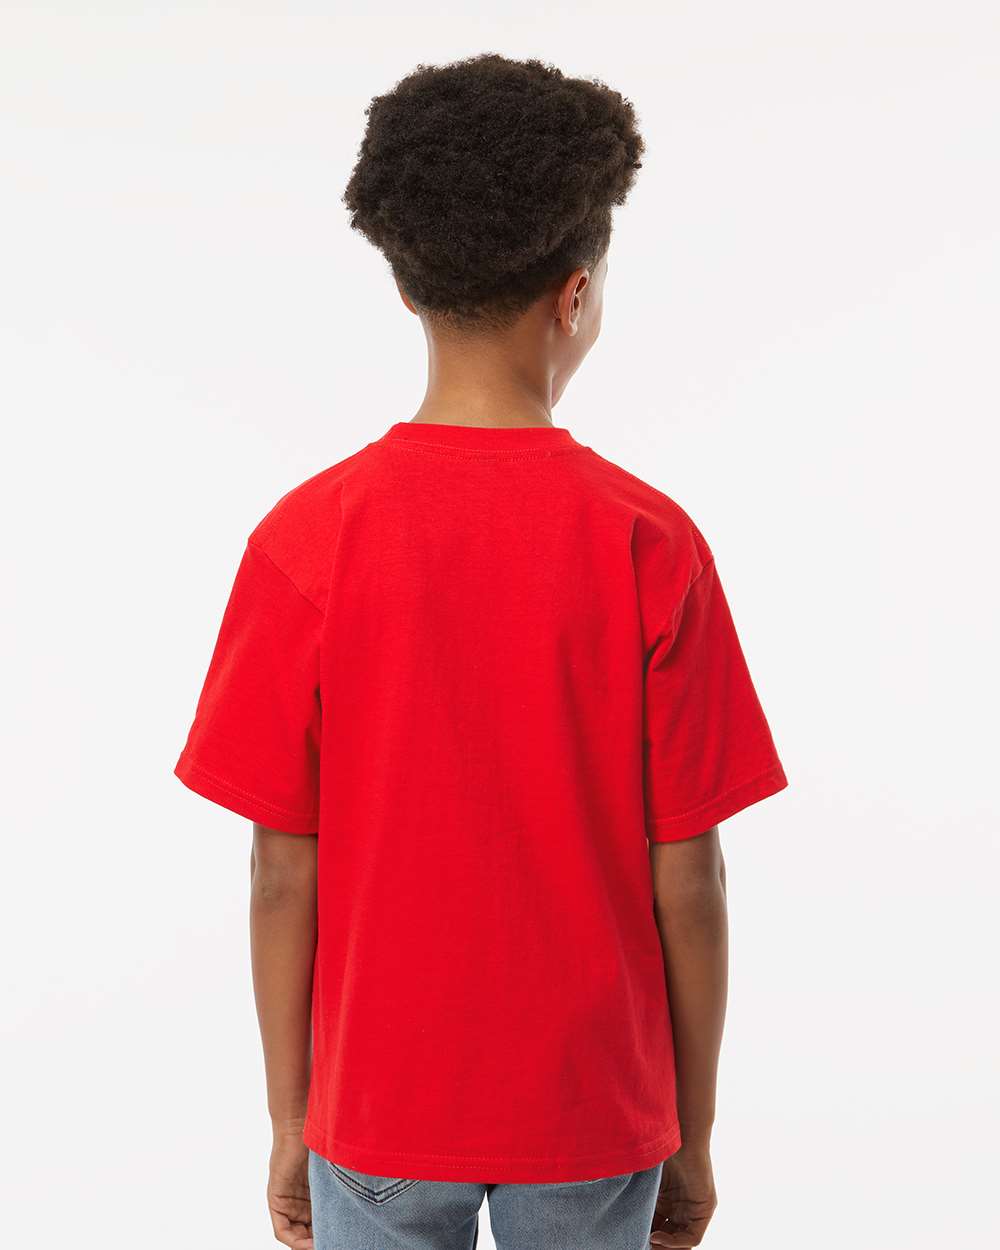 M&O Youth Gold Soft Touch T-Shirt 4850 #colormdl_Deep Red